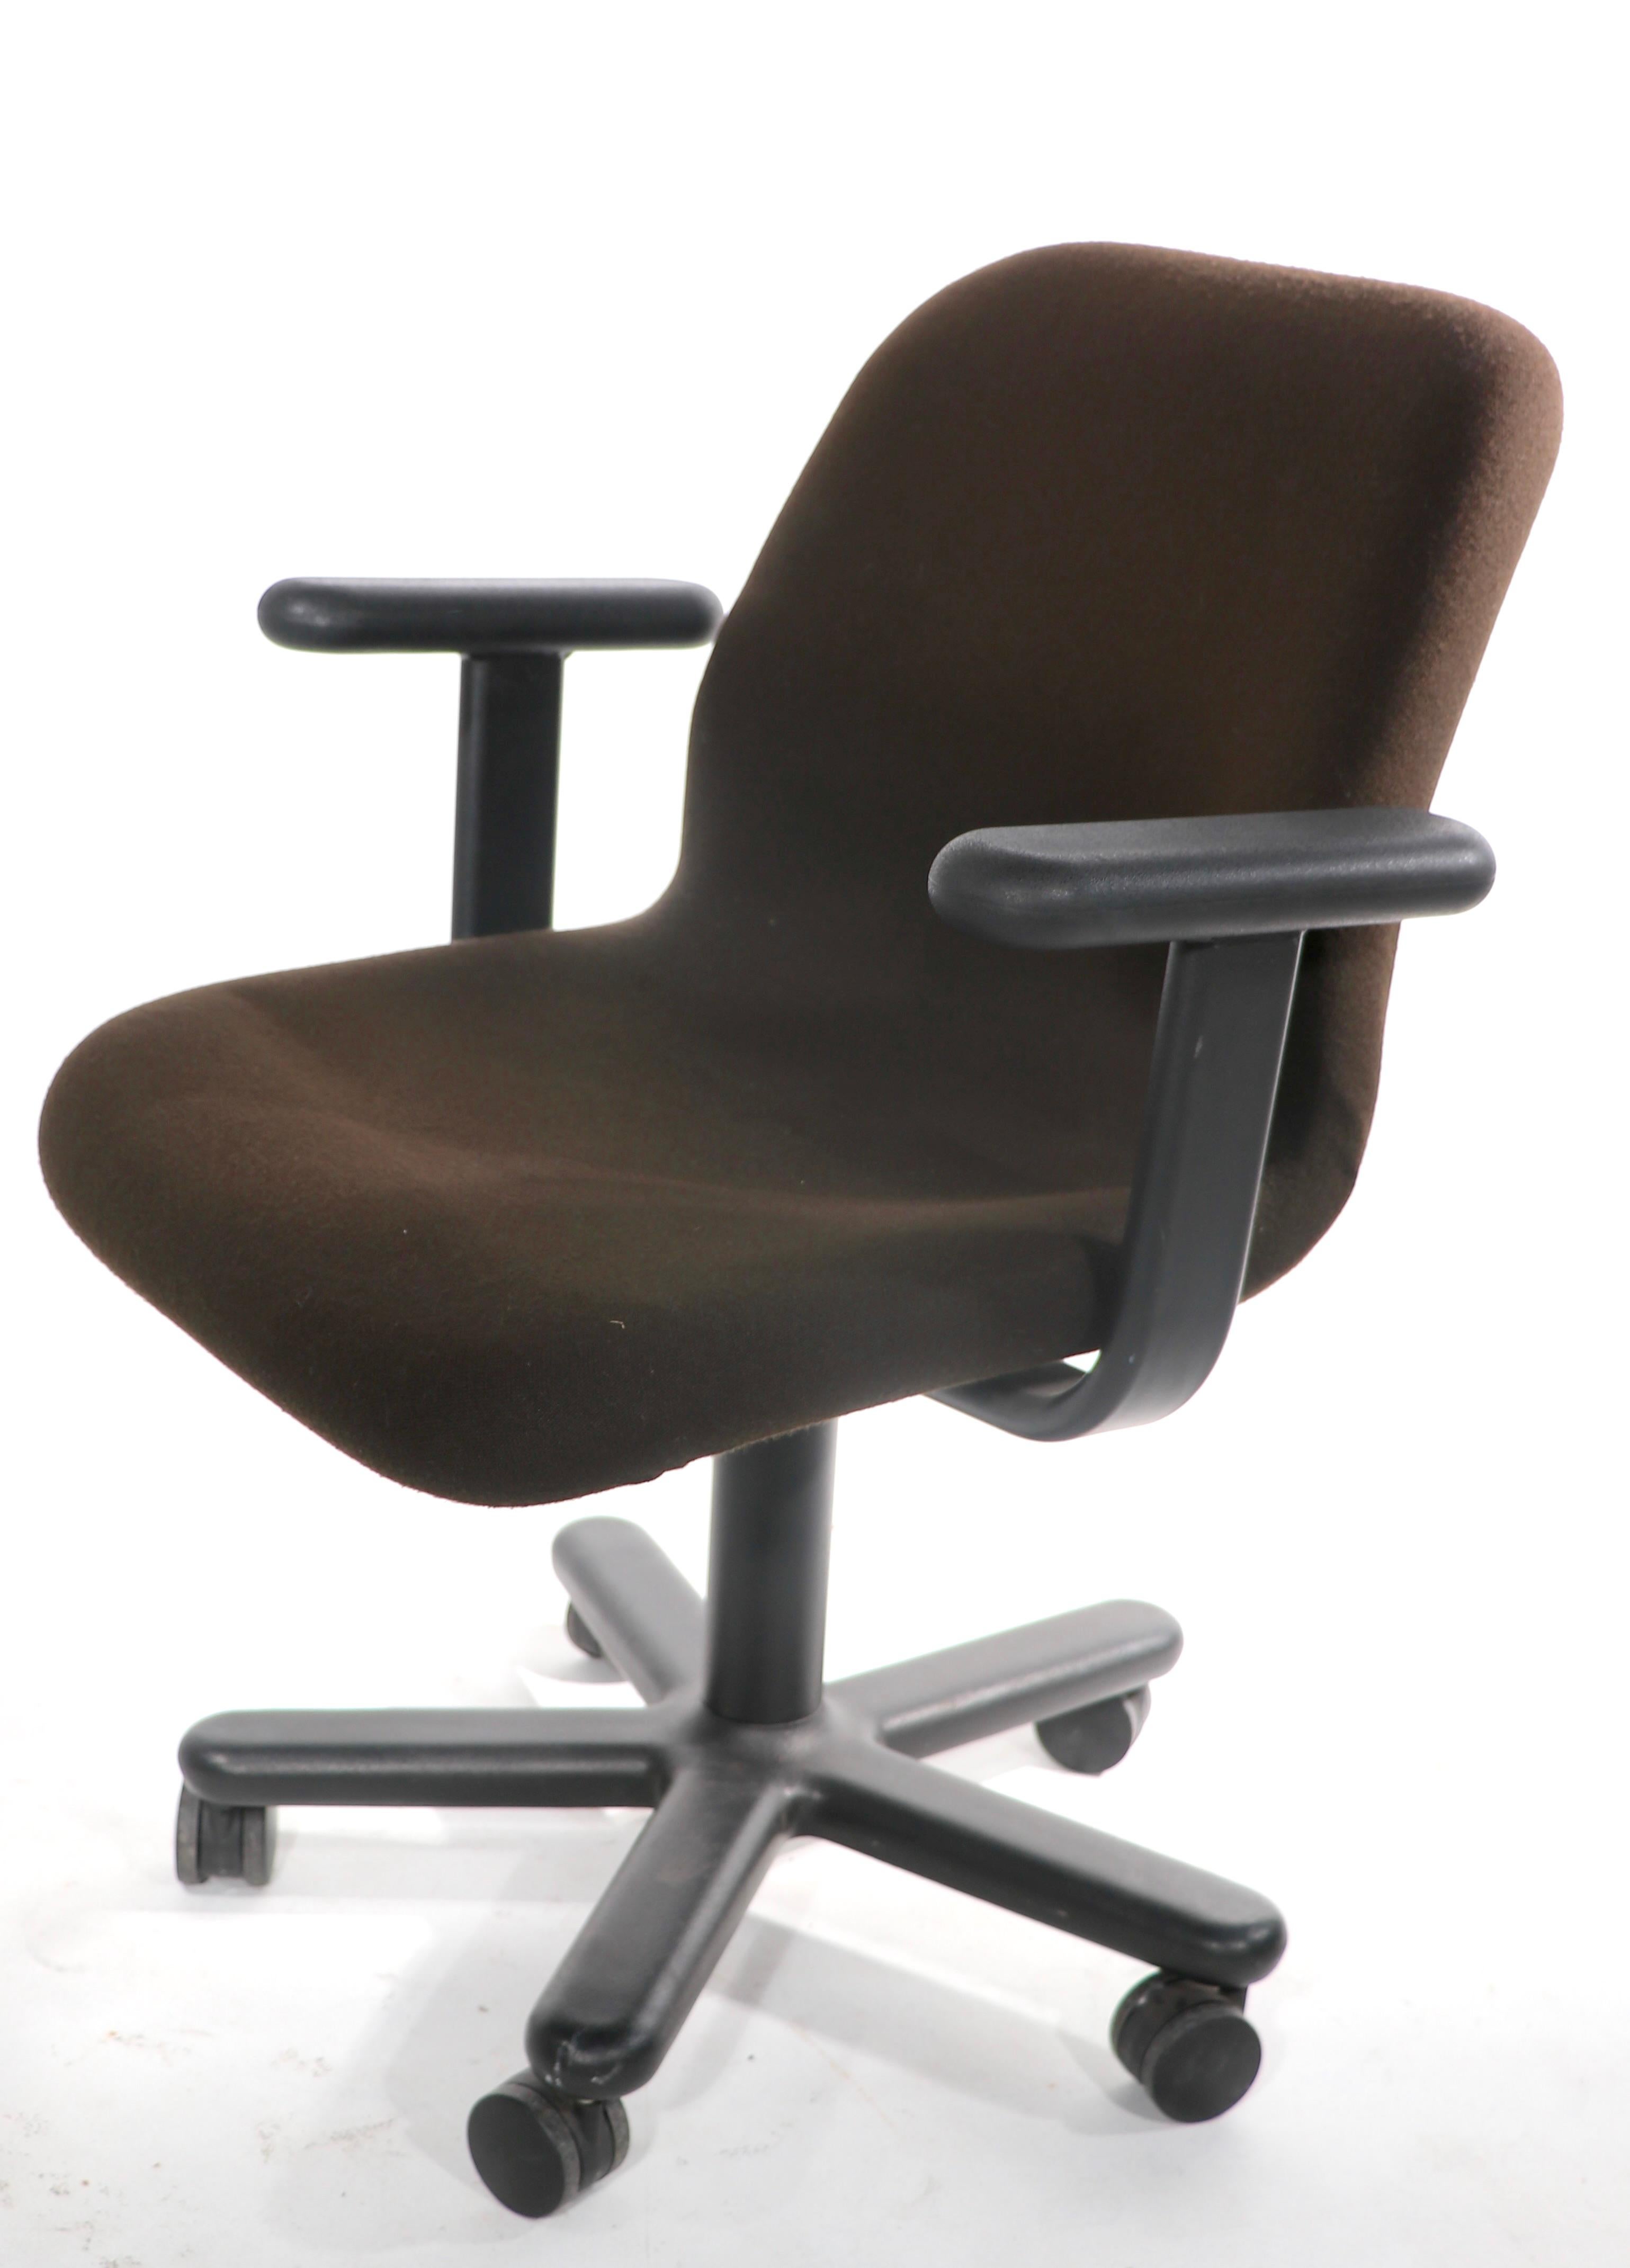 Plastic Post Modern Knoll Swivel Desk, Office, Chairs 11 Available For Sale